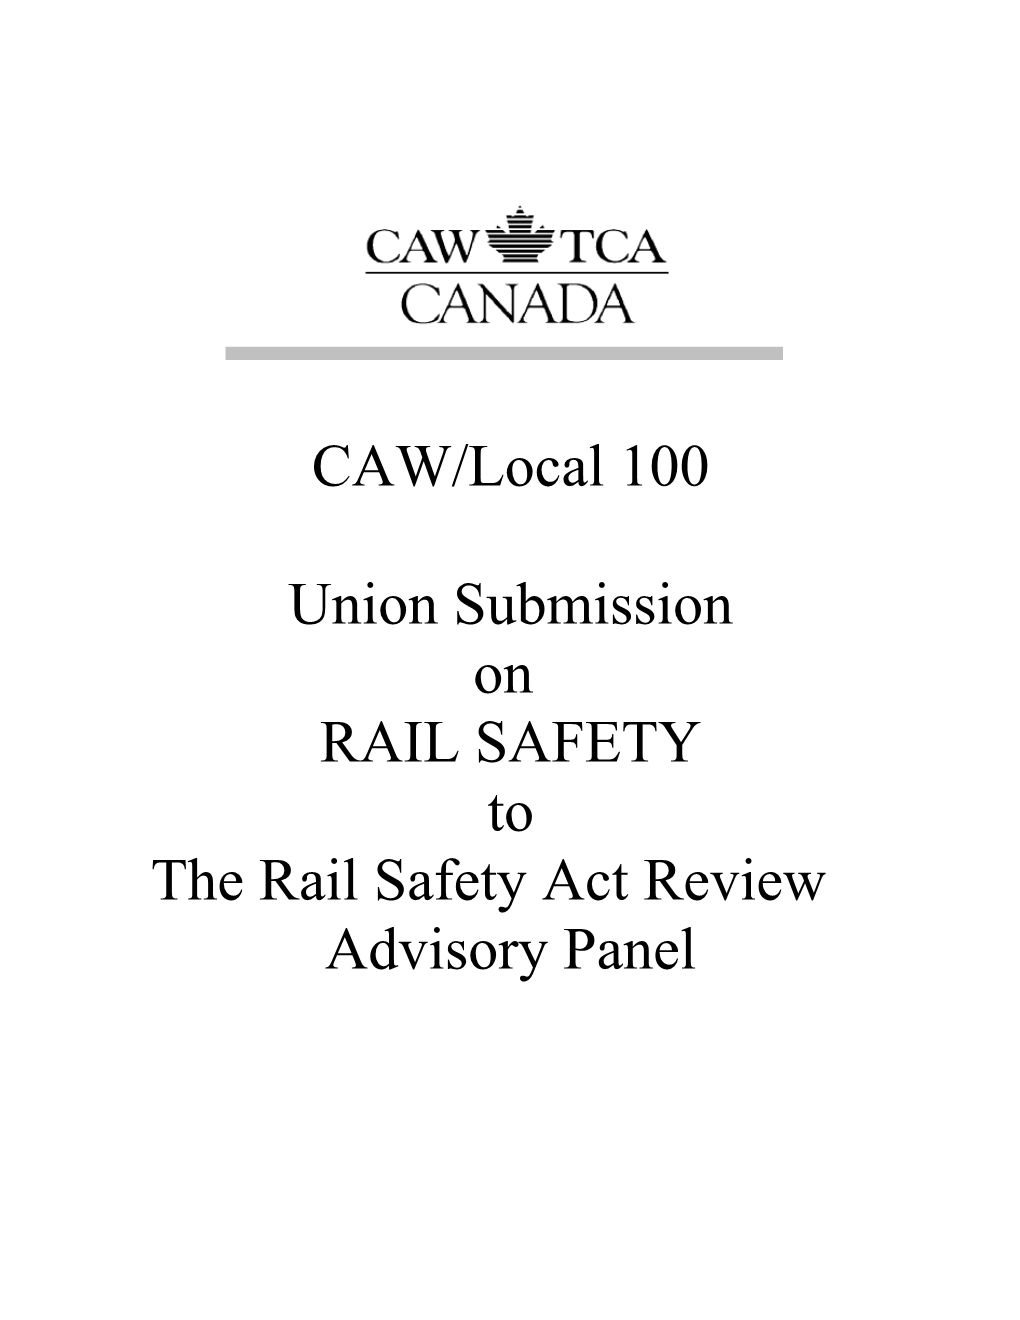 The Rail Safety Act Review